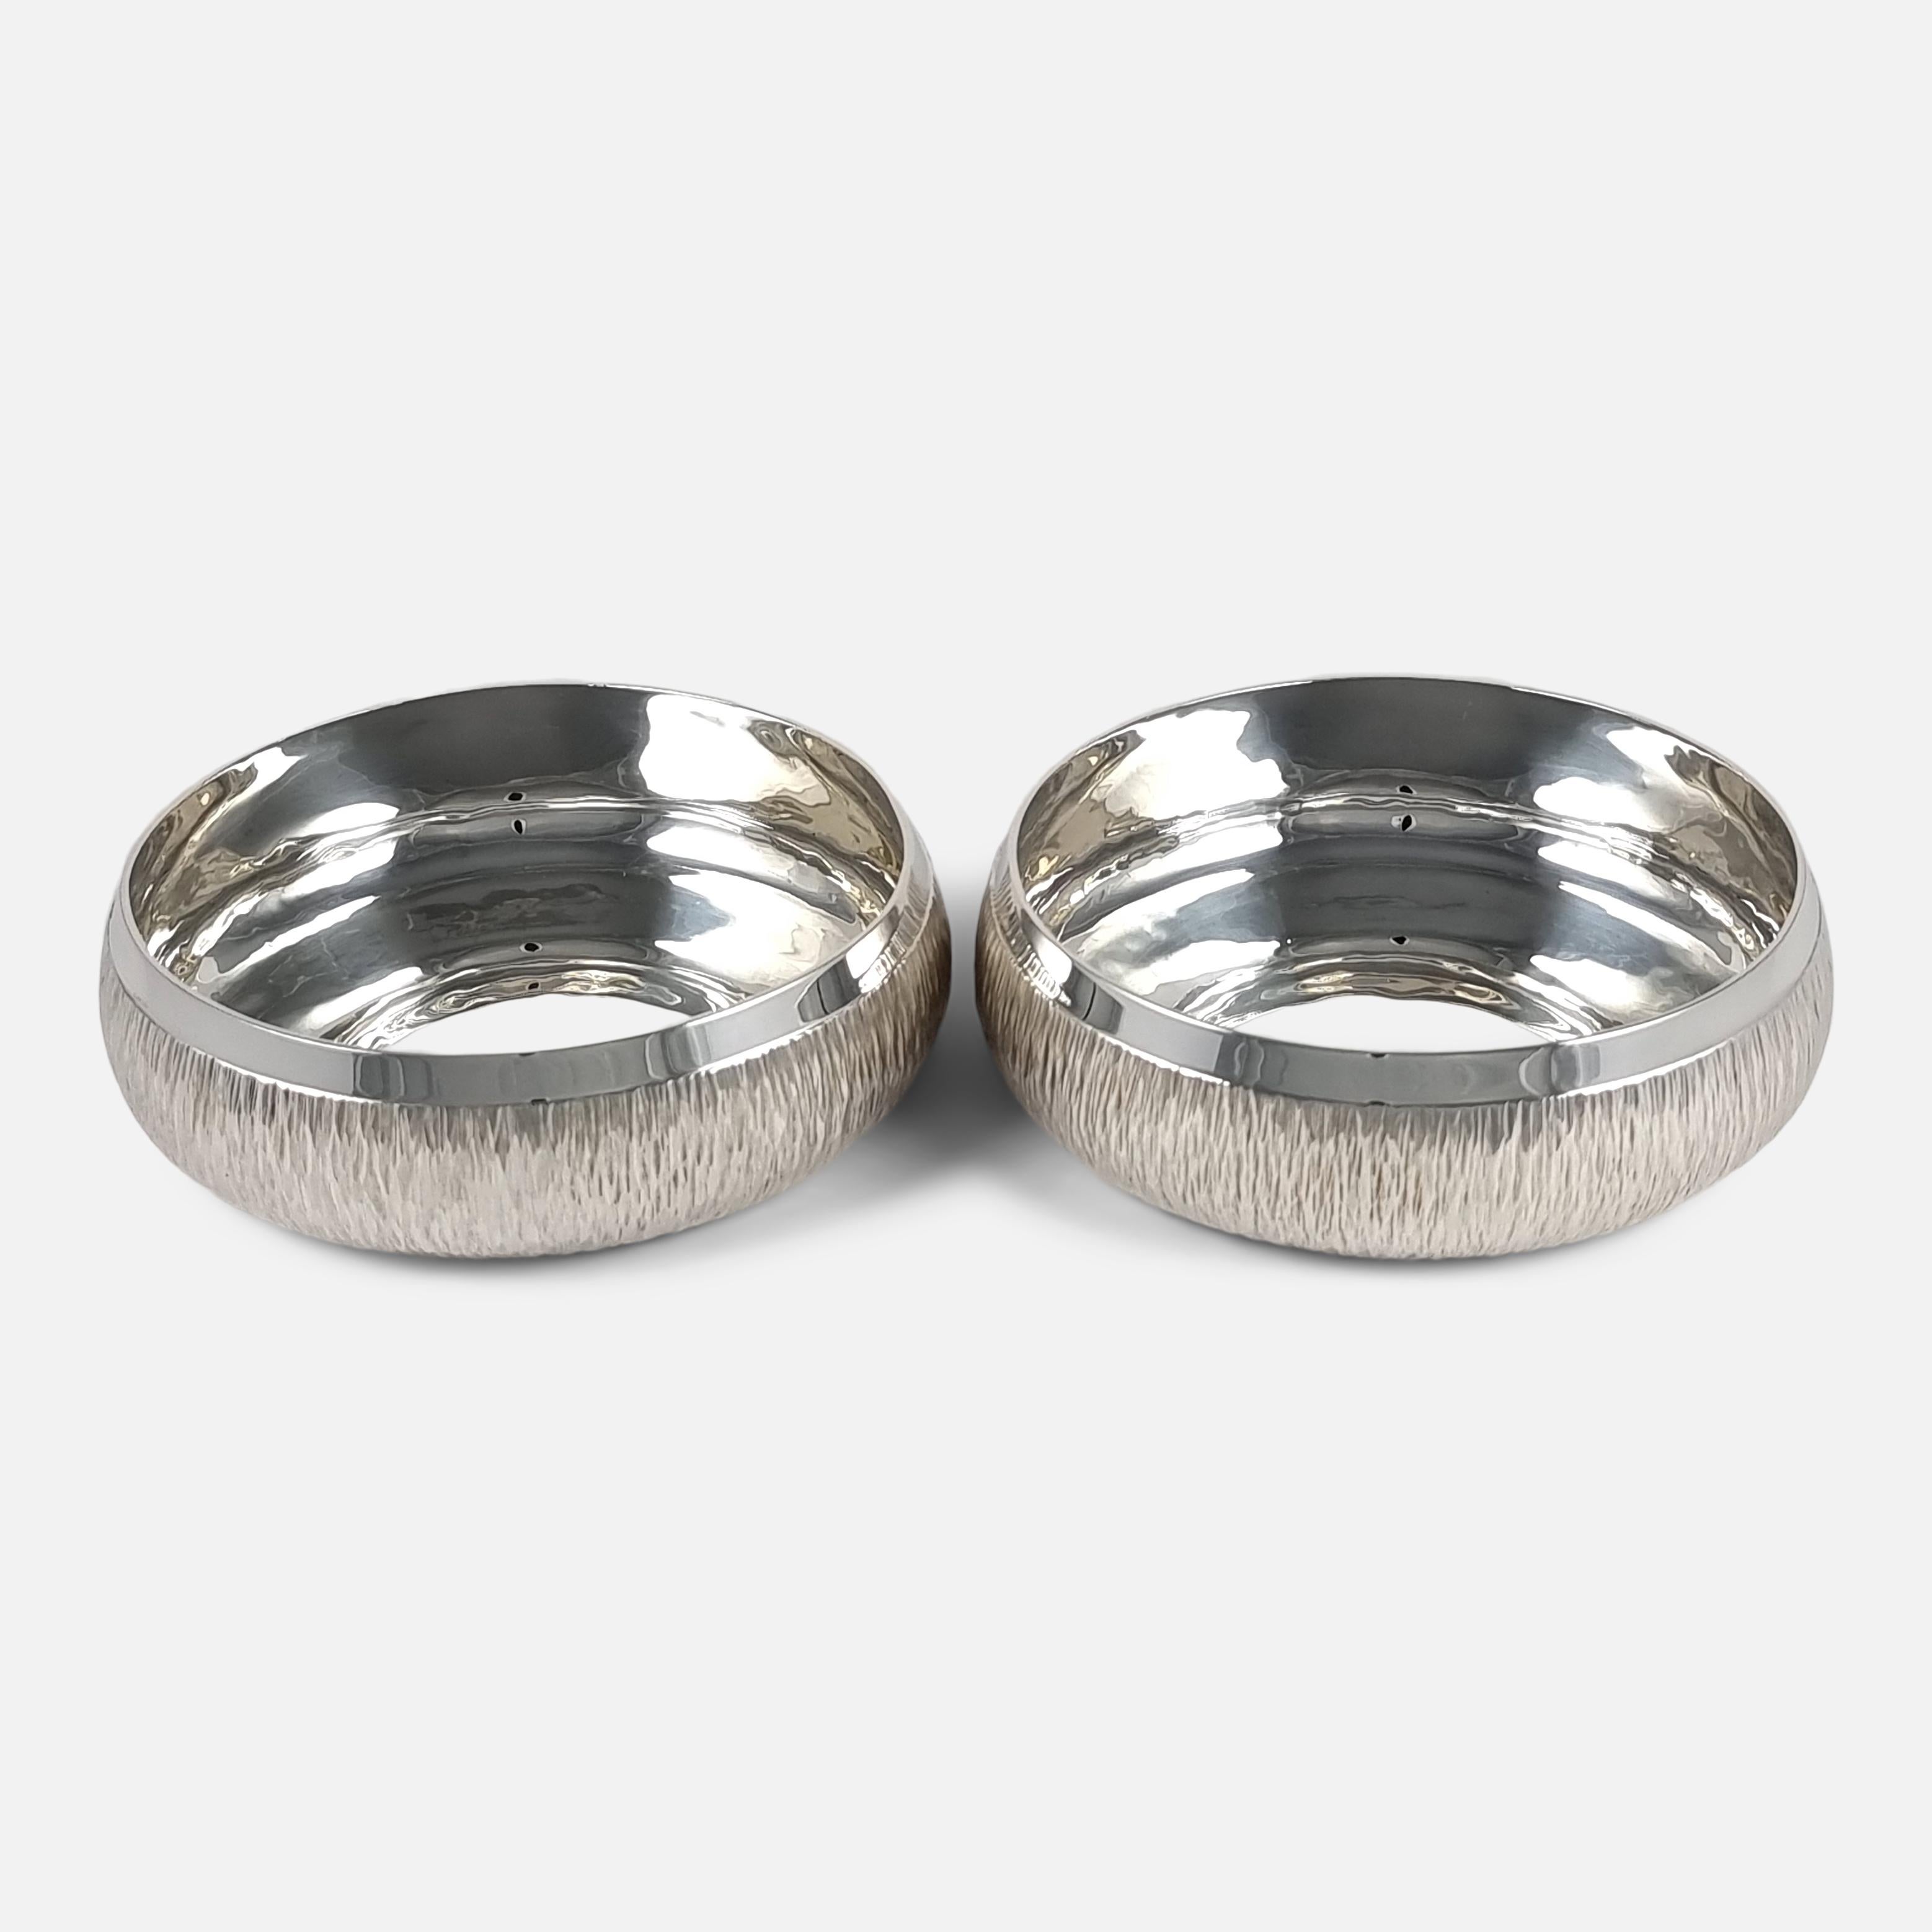 Late 20th Century Pair of Sterling Silver Bowls, Gerald Benney, 1983